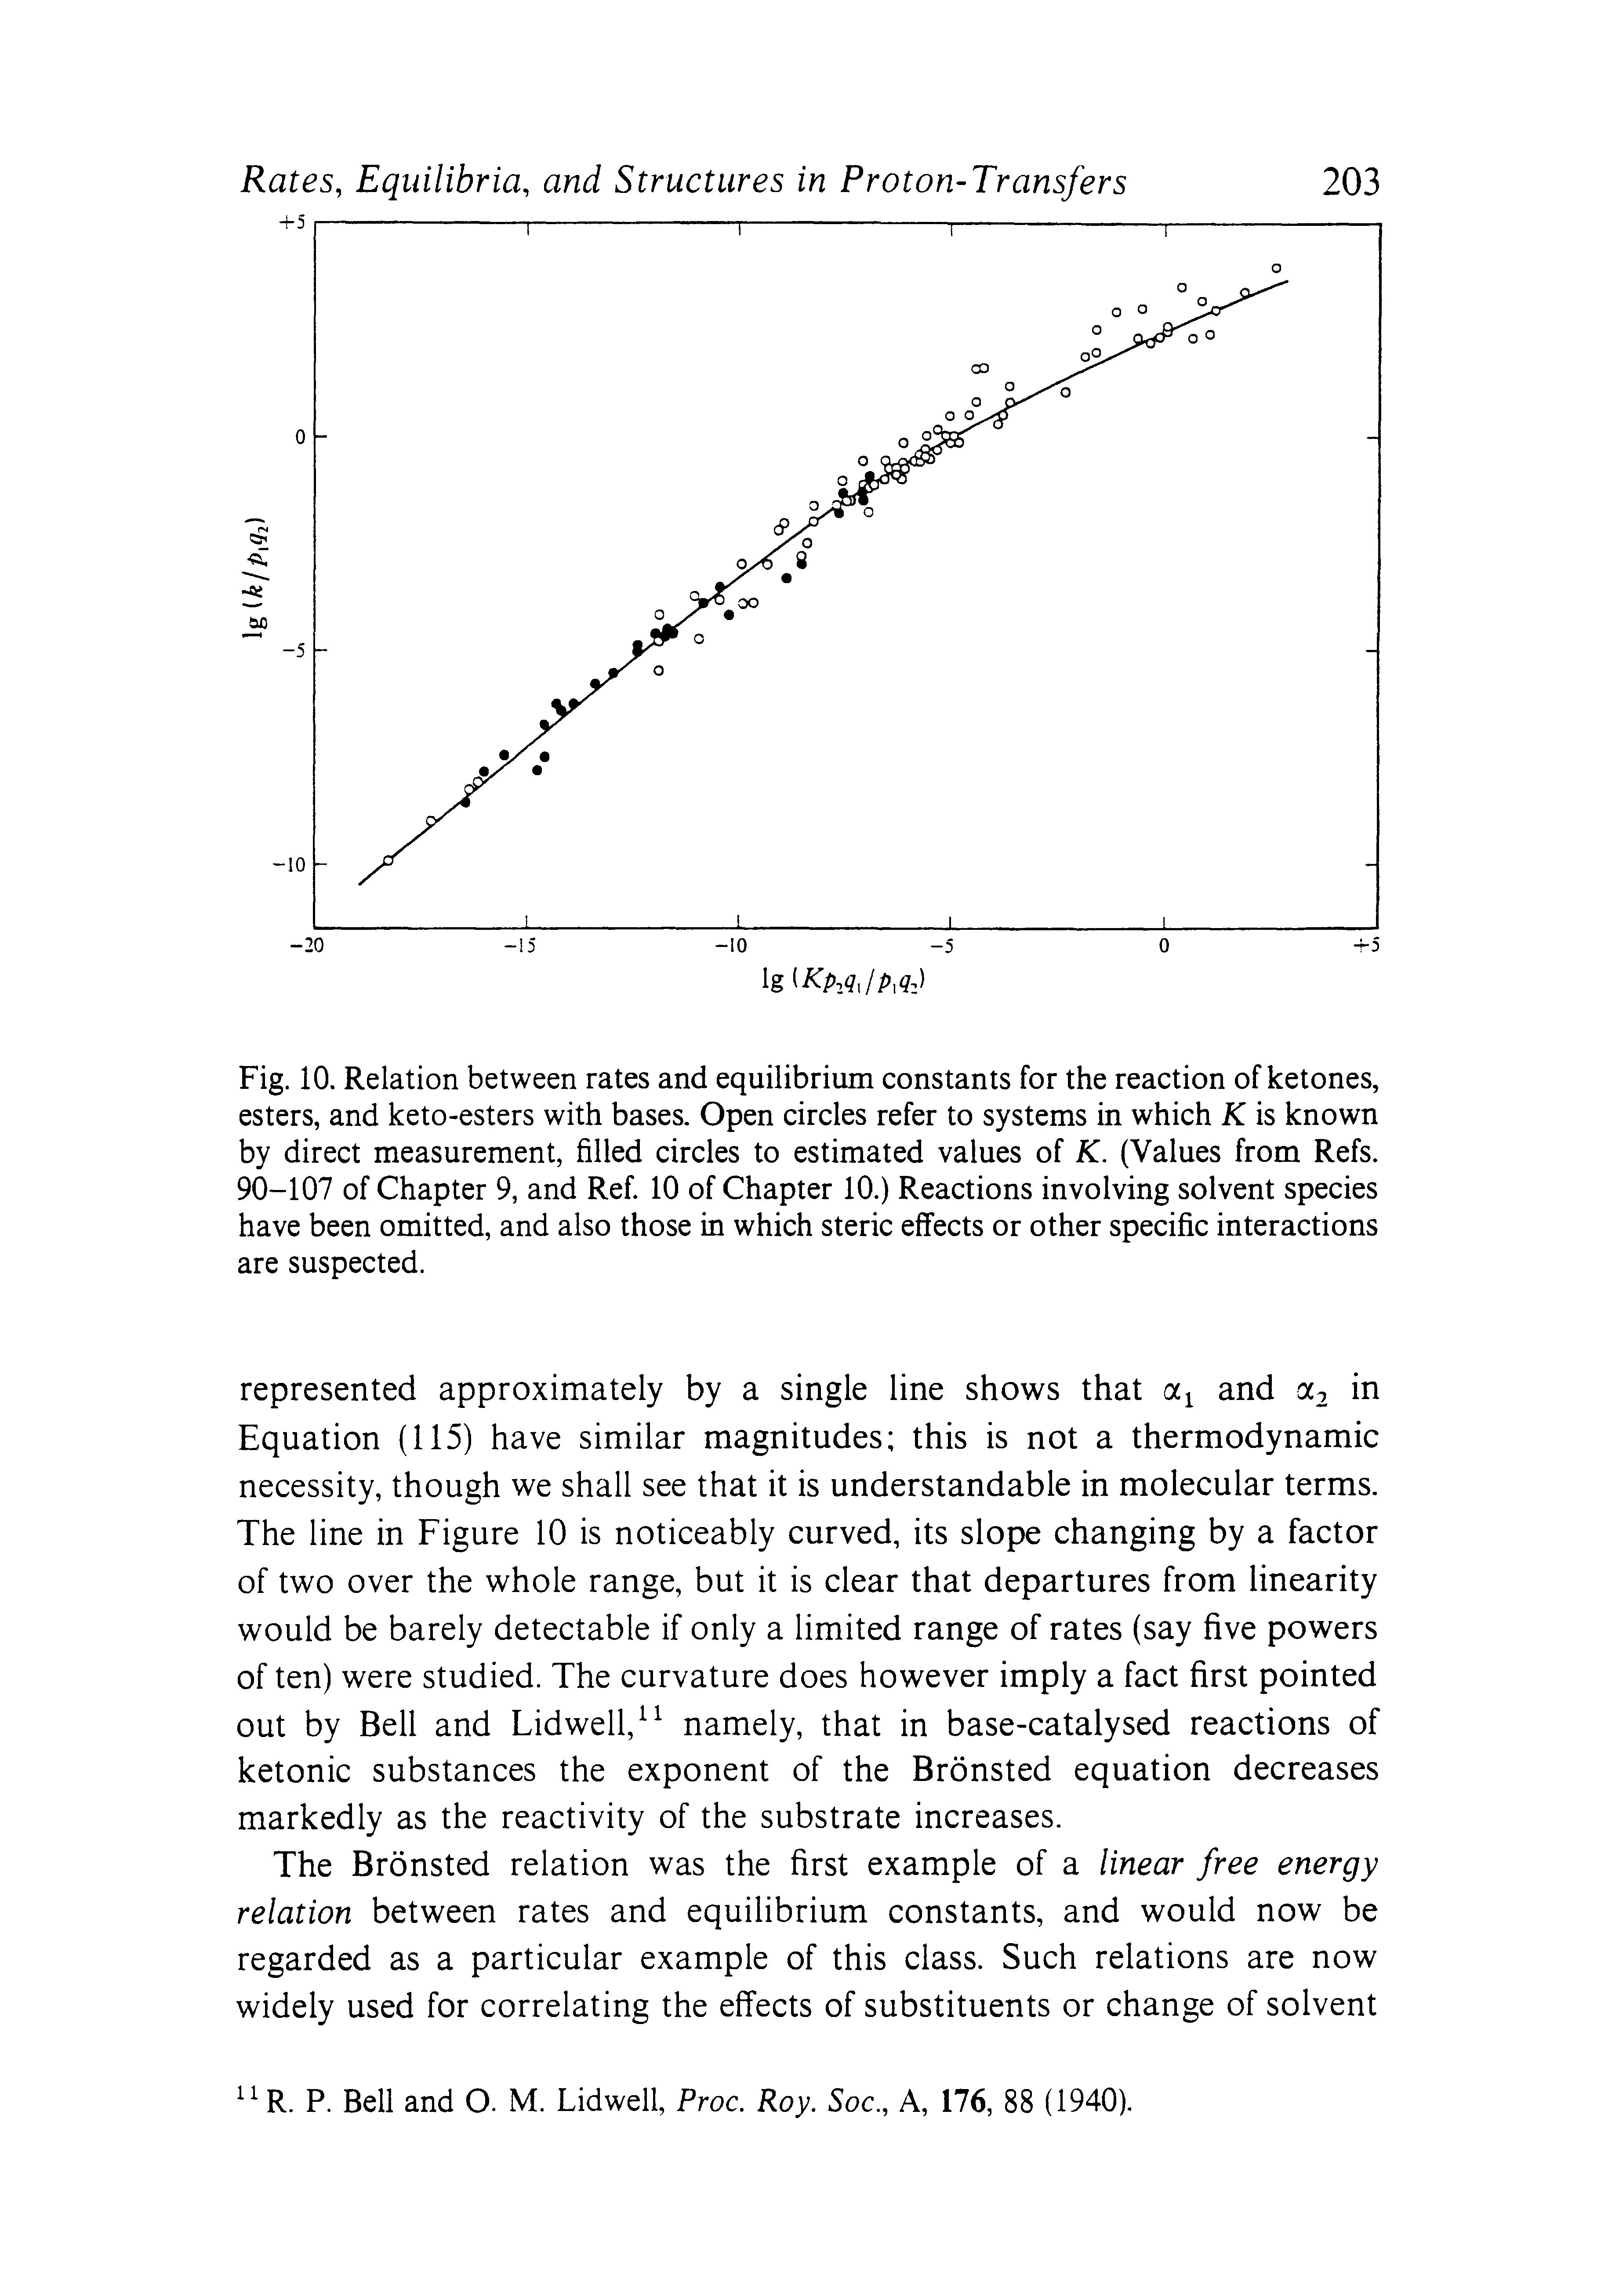 Fig. 10. Relation between rates and equilibrium constants for the reaction of ketones, esters, and keto-esters with bases. Open circles refer to systems in which K is known by direct measurement, filled circles to estimated values of K. (Values from Refs. 90-107 of Chapter 9, and Ref. 10 of Chapter 10.) Reactions involving solvent species have been omitted, and also those in which steric effects or other specific interactions are suspected.